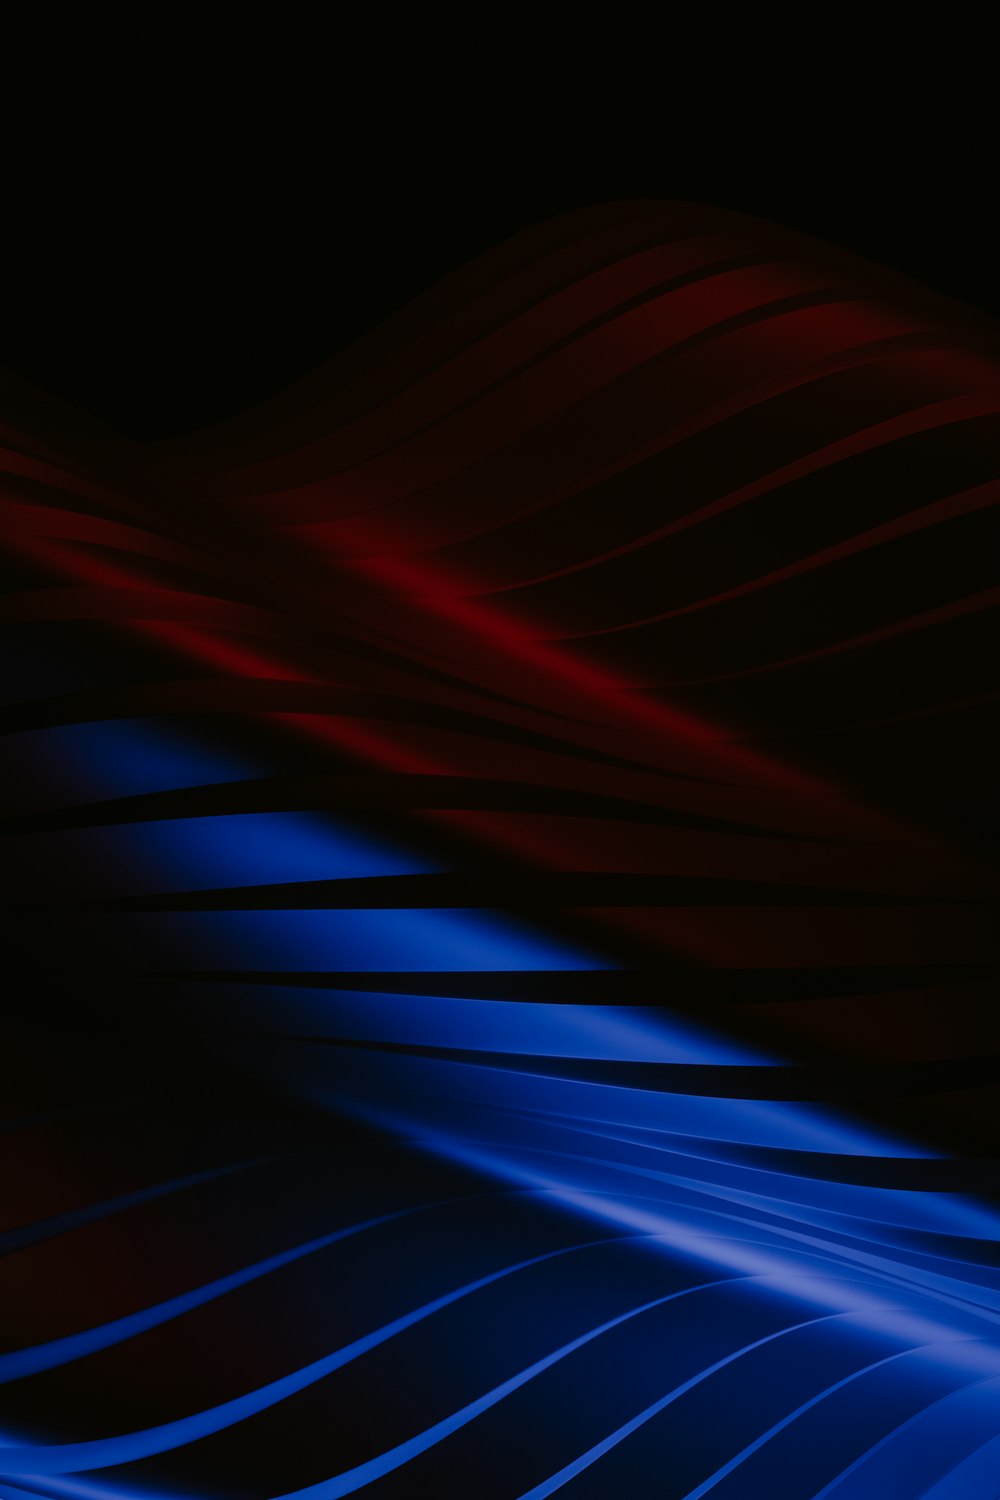 red and blue abstract background